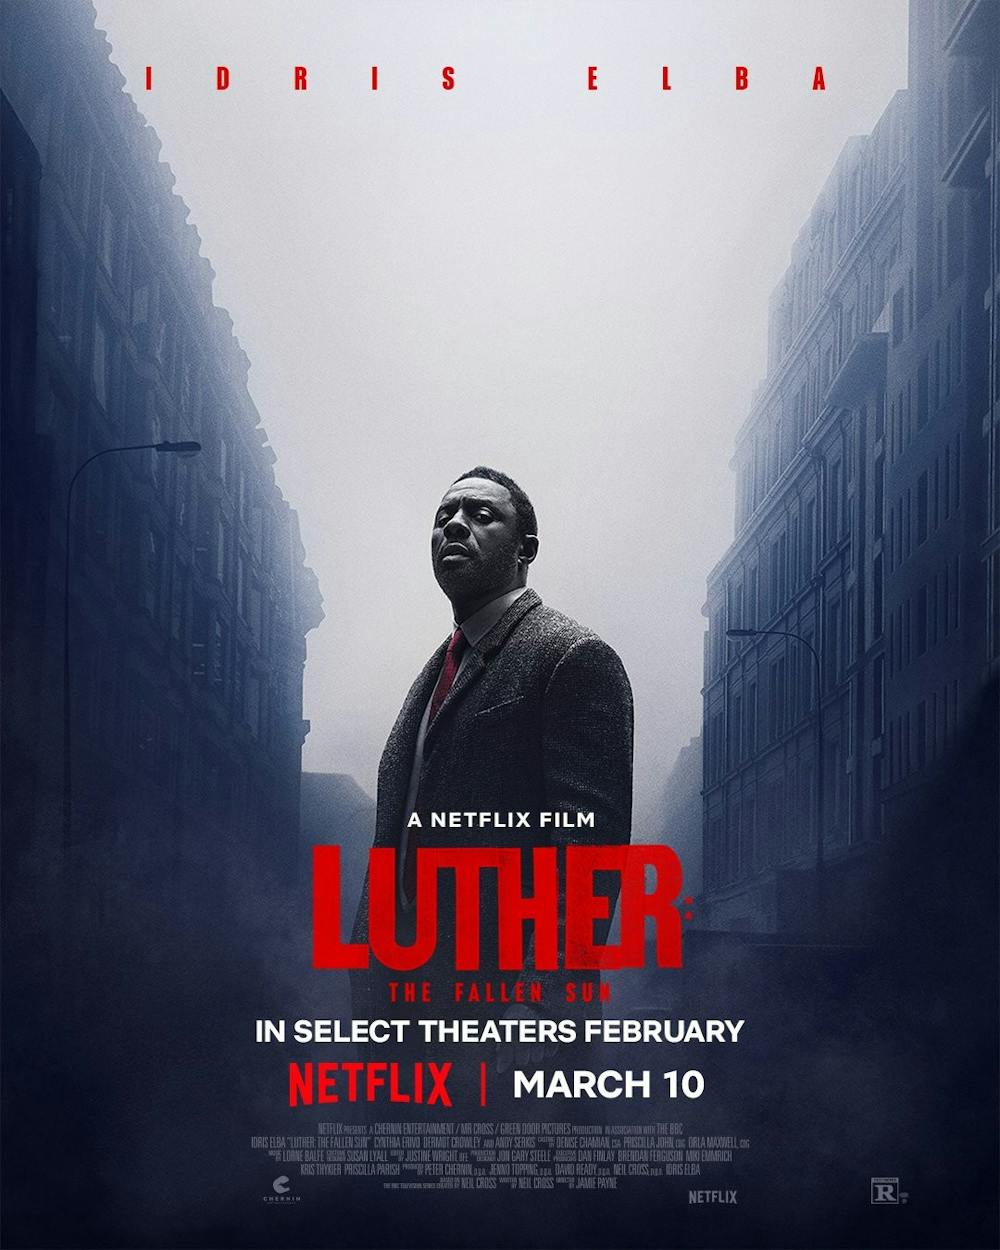 Review: 'Luther: The Fallen Sun' is a captivating dark detective thriller with striking scenes